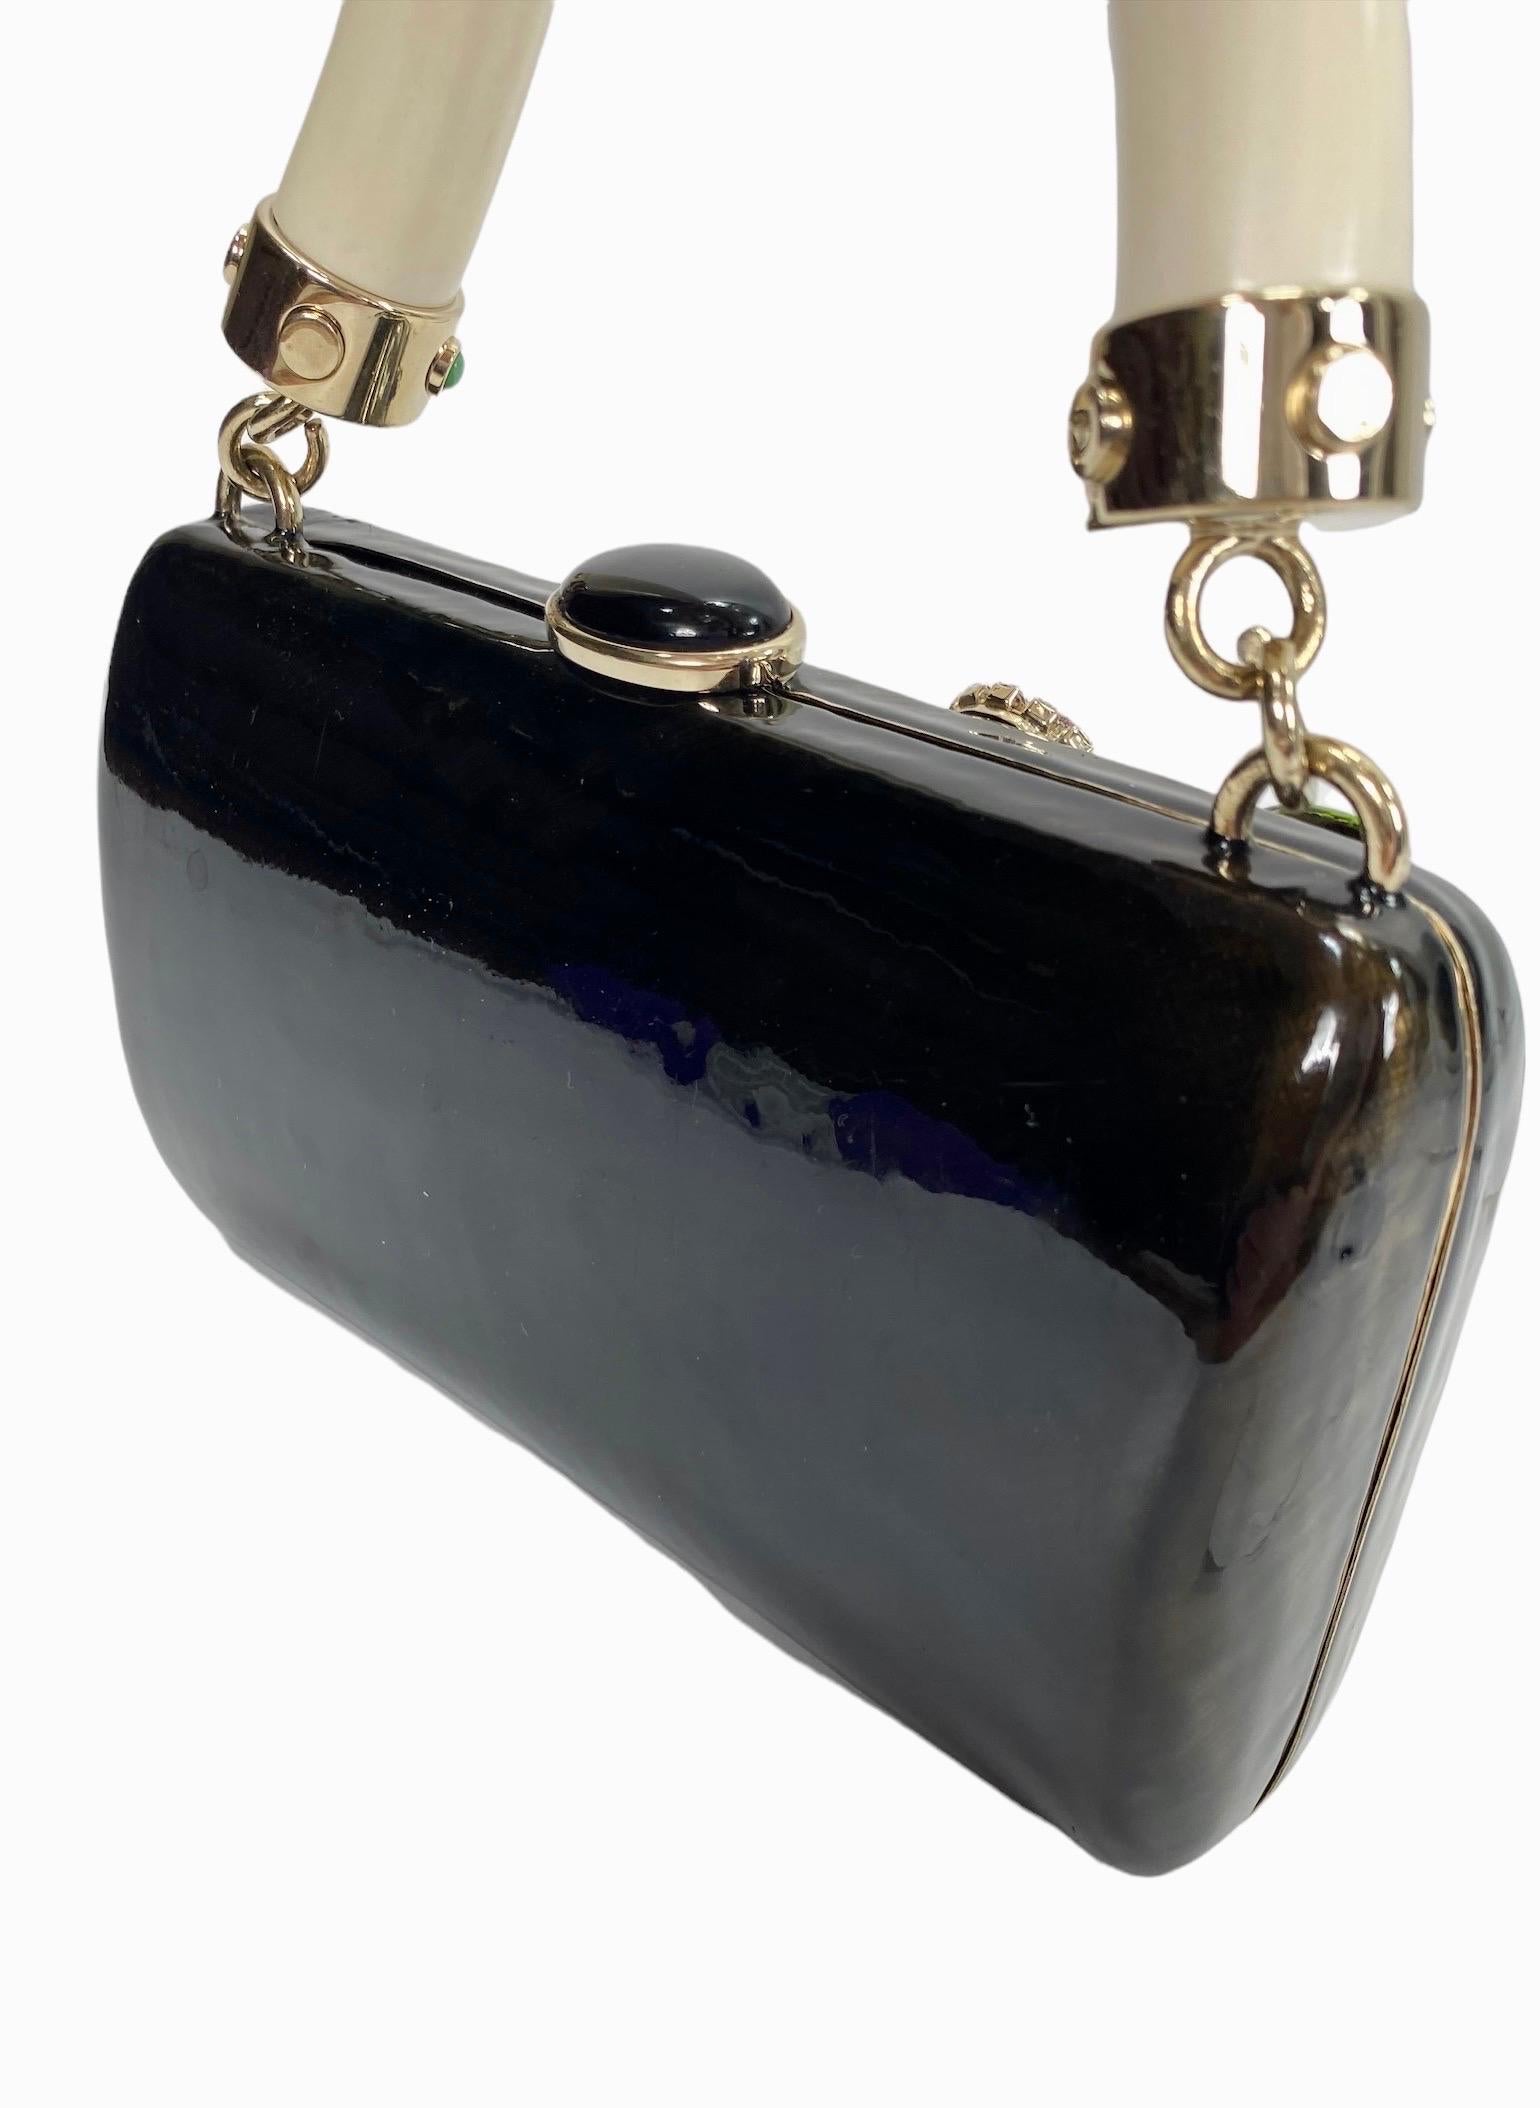 Tom Ford for Yves Saint Laurent Rive Gauche S/S 2004 Enamel Jeweled Clutch Bag For Sale 1